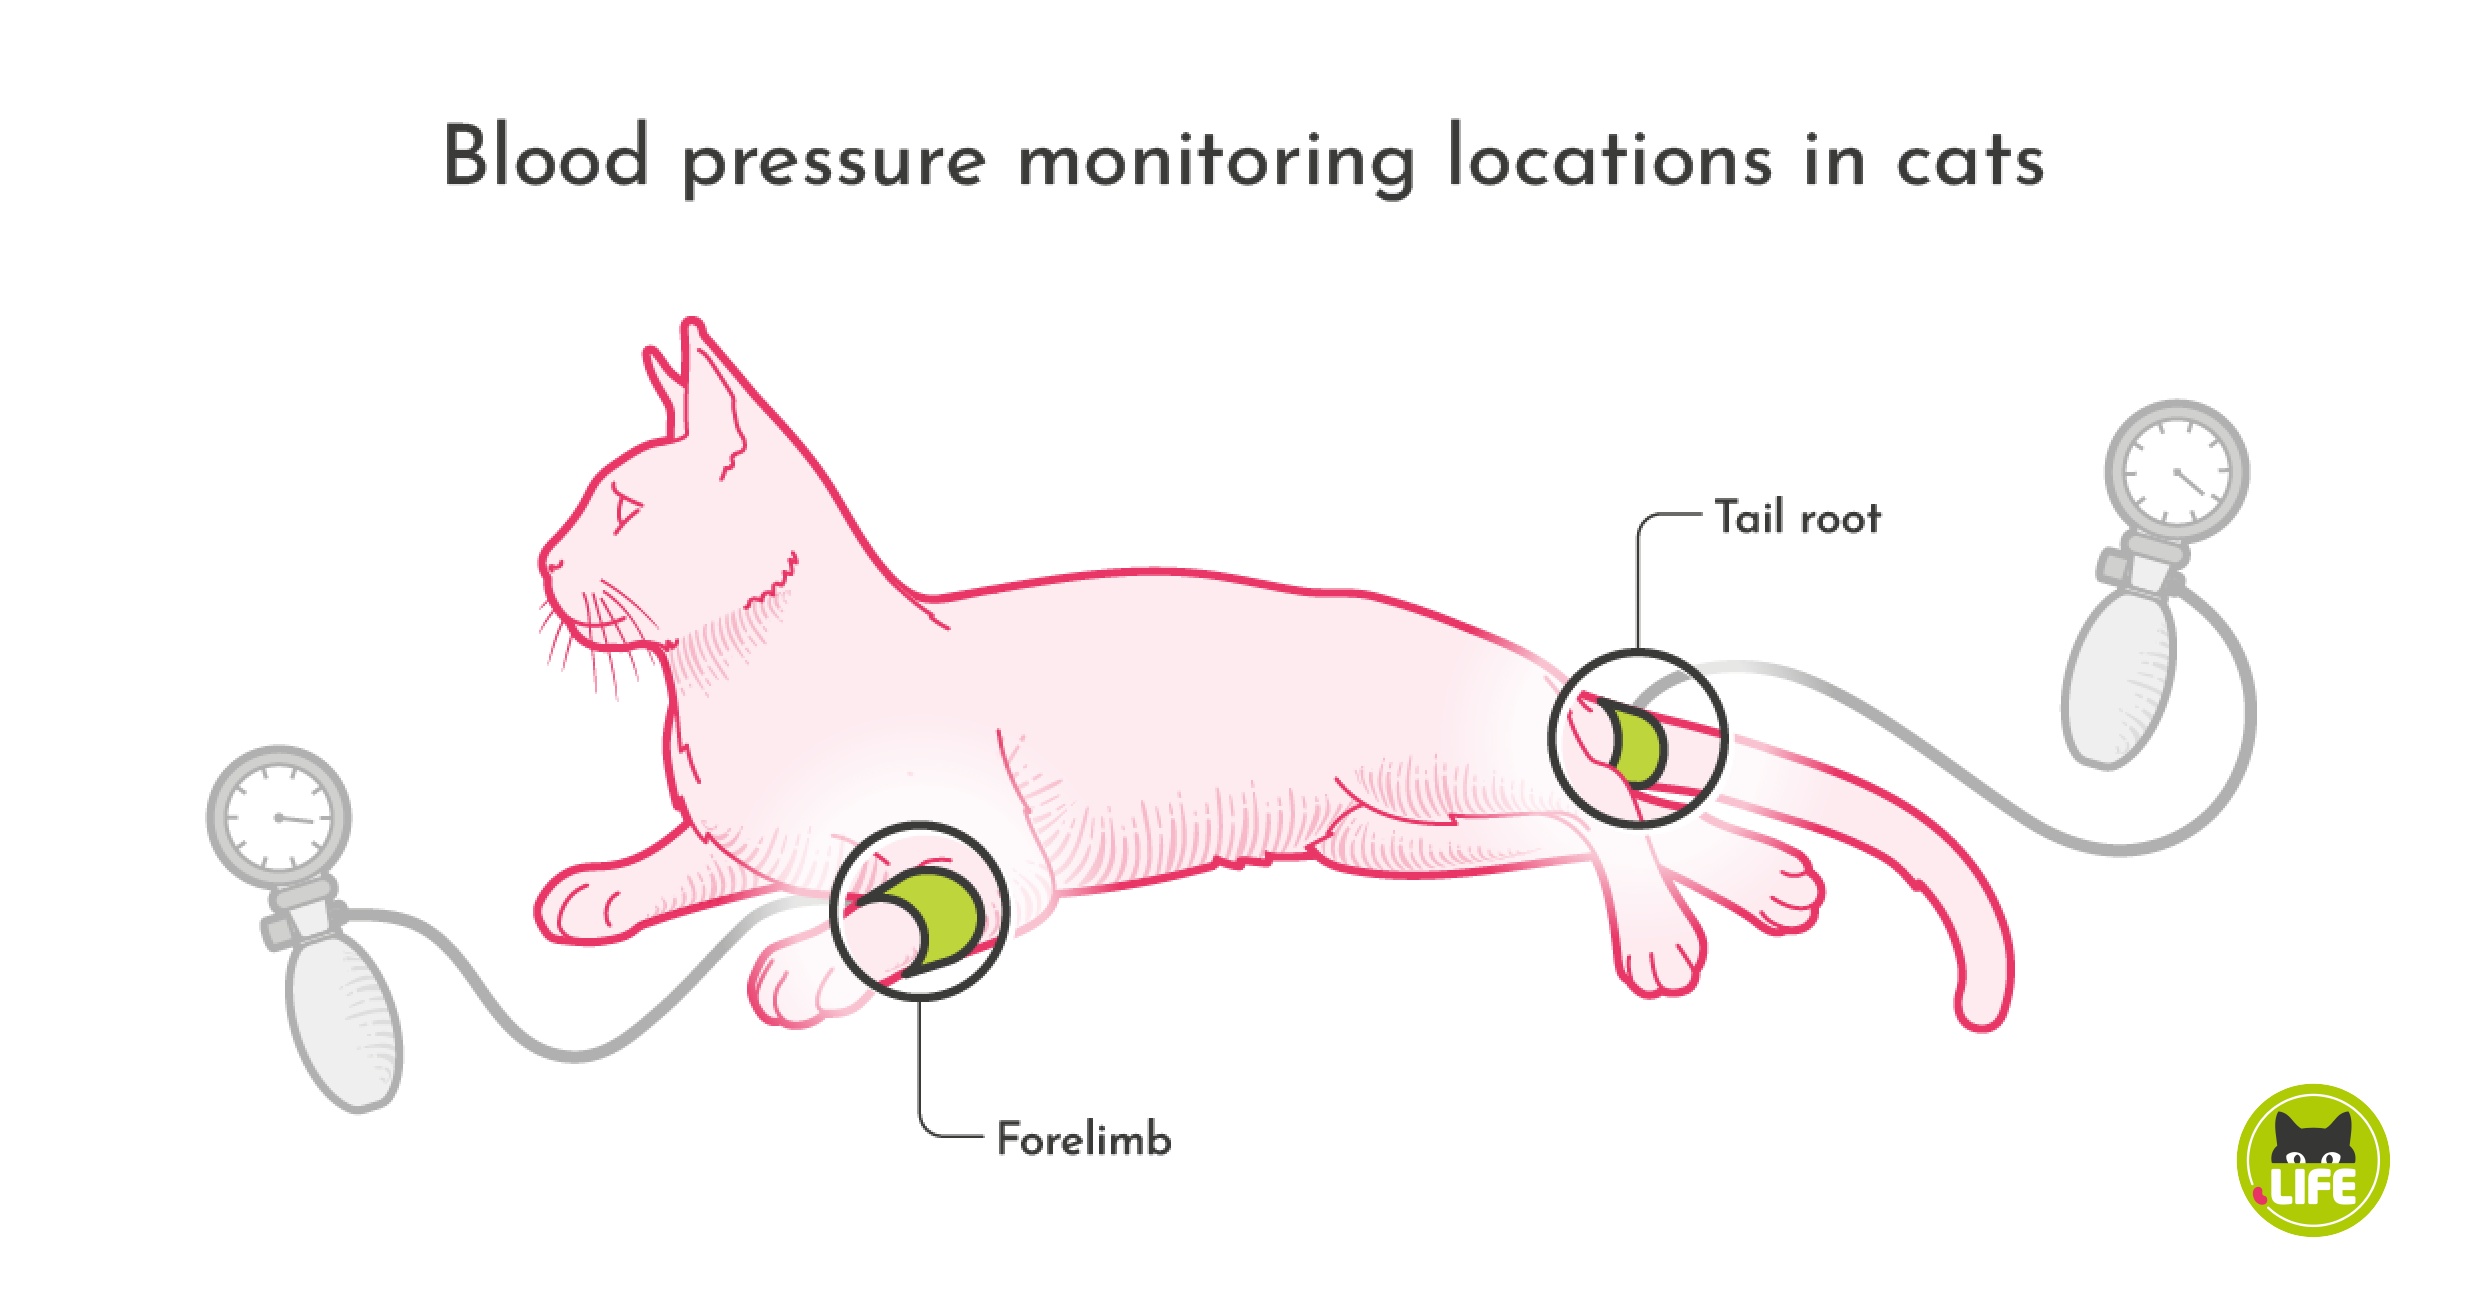 Blood pressure monitoring locations in cats.